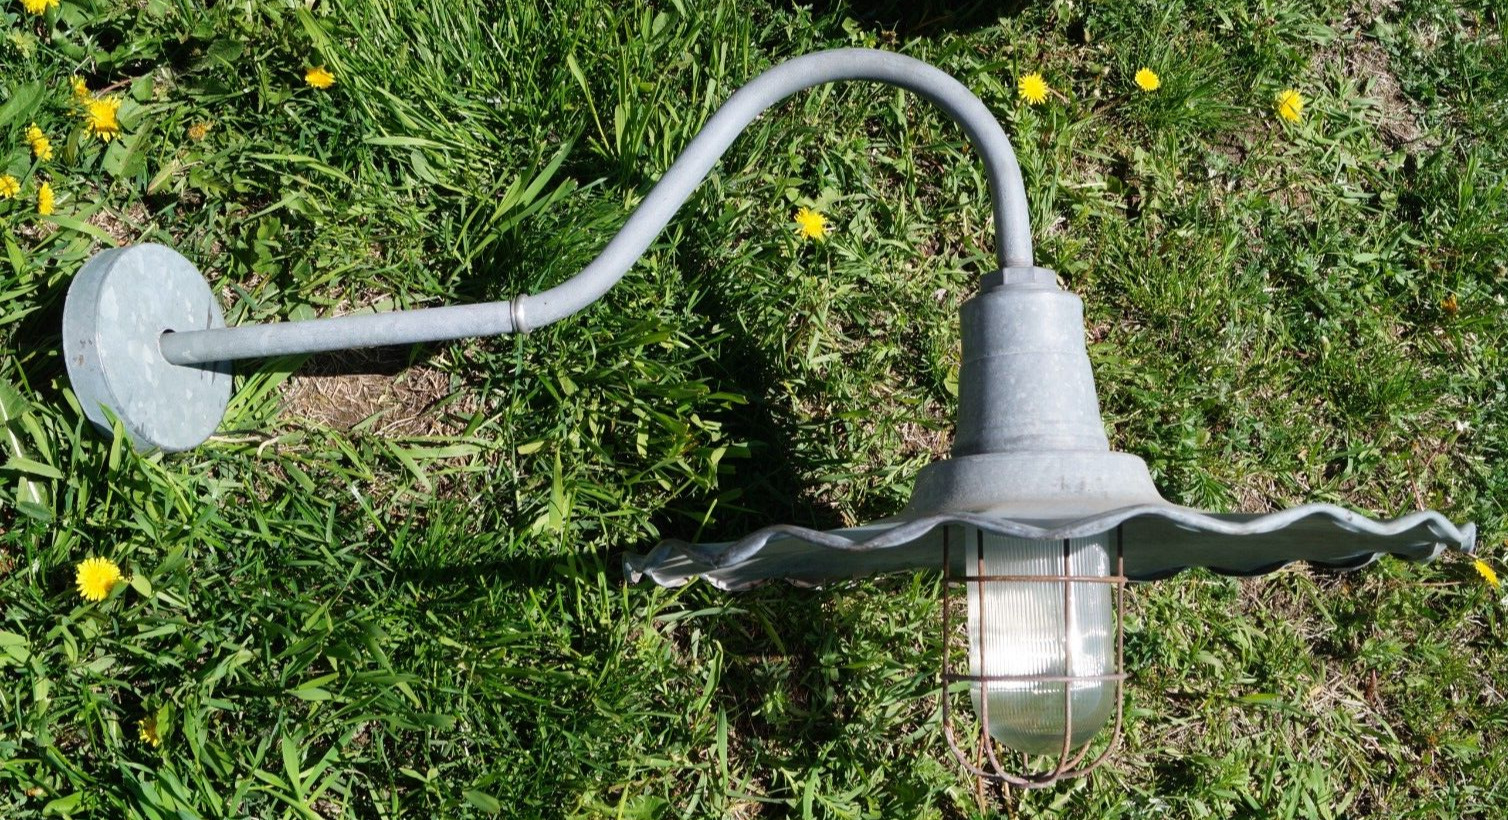 Antique 1930s Gas Station Industrial Light / Lamp - ALL ORIGINAL SCALLOPED SHADE